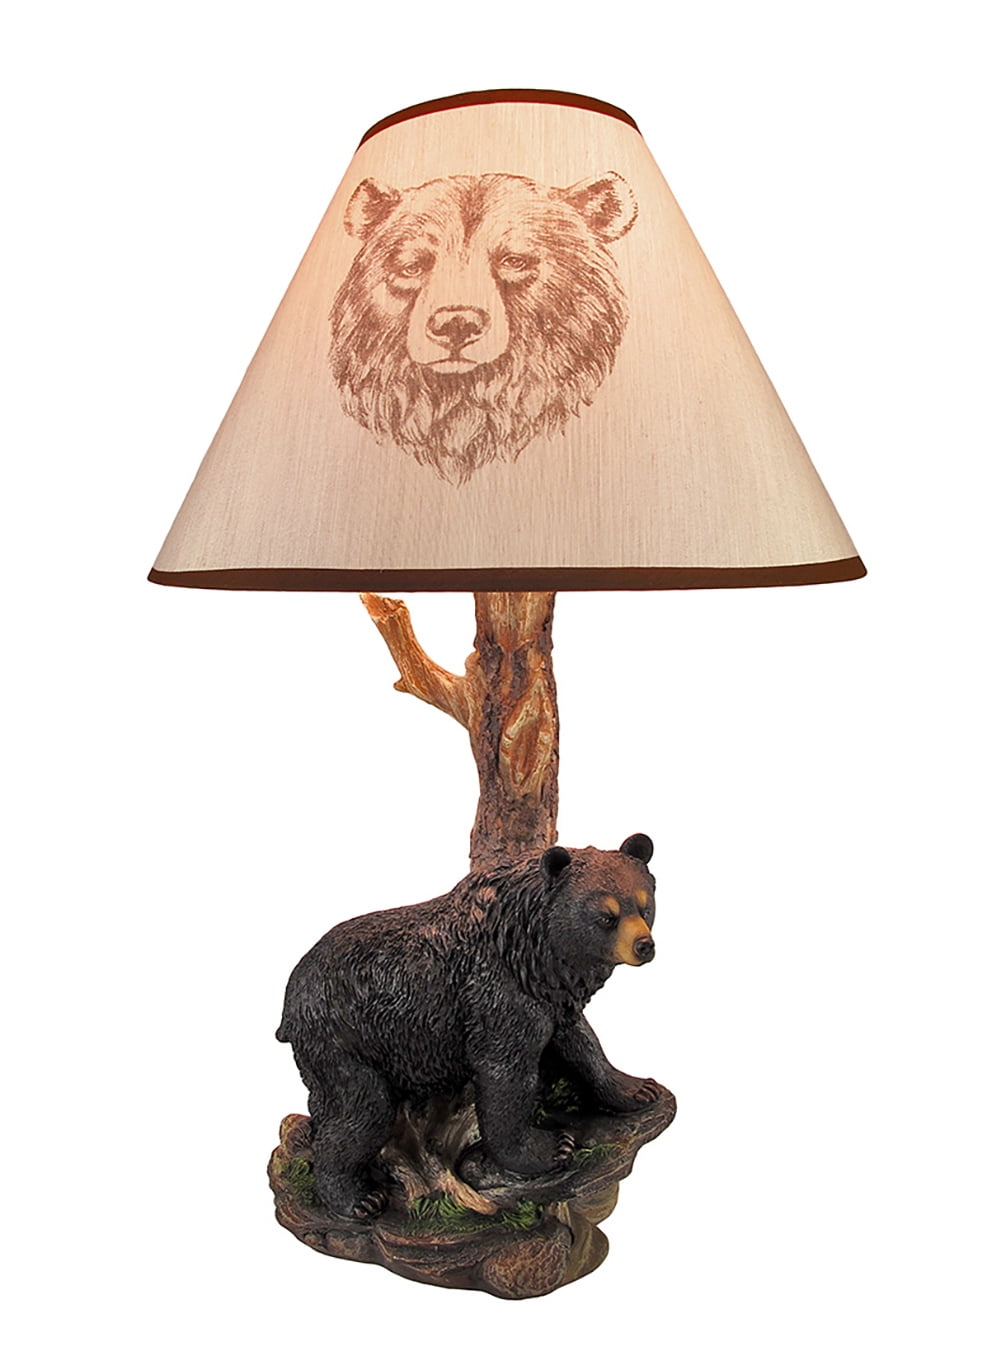 Grizzly Bear Lampshades Ideal To Match Kids Grizzly Bear Wall Decals & Stickers 